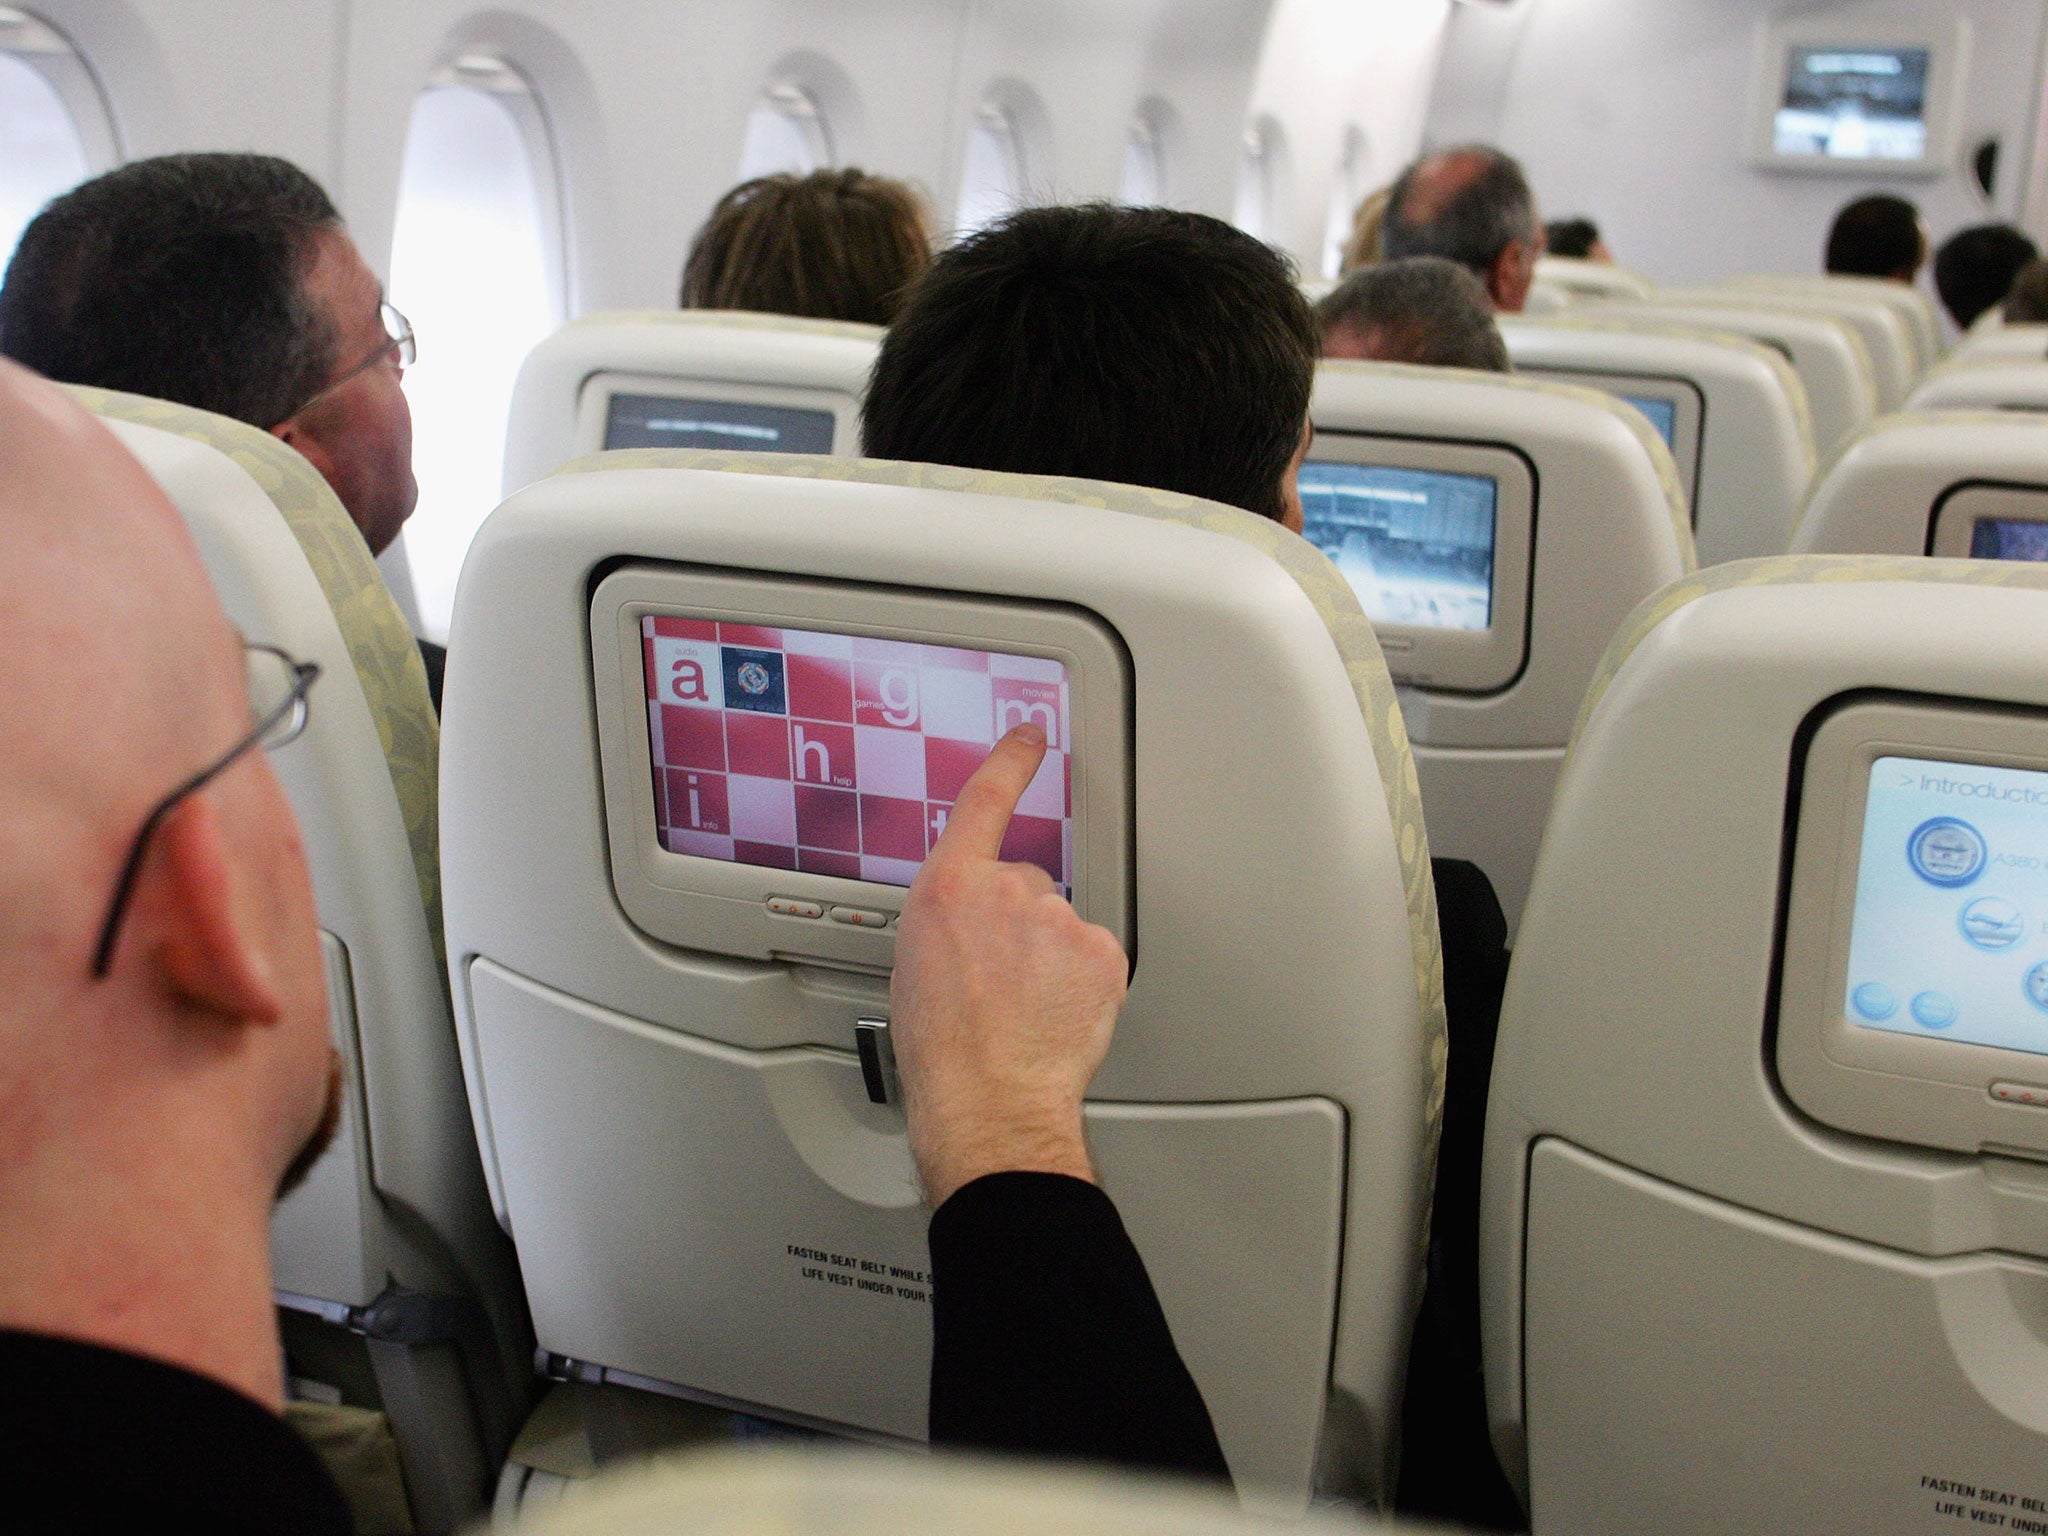 Removing in-flight entertainment systems will ultimately reuce the cost of flying